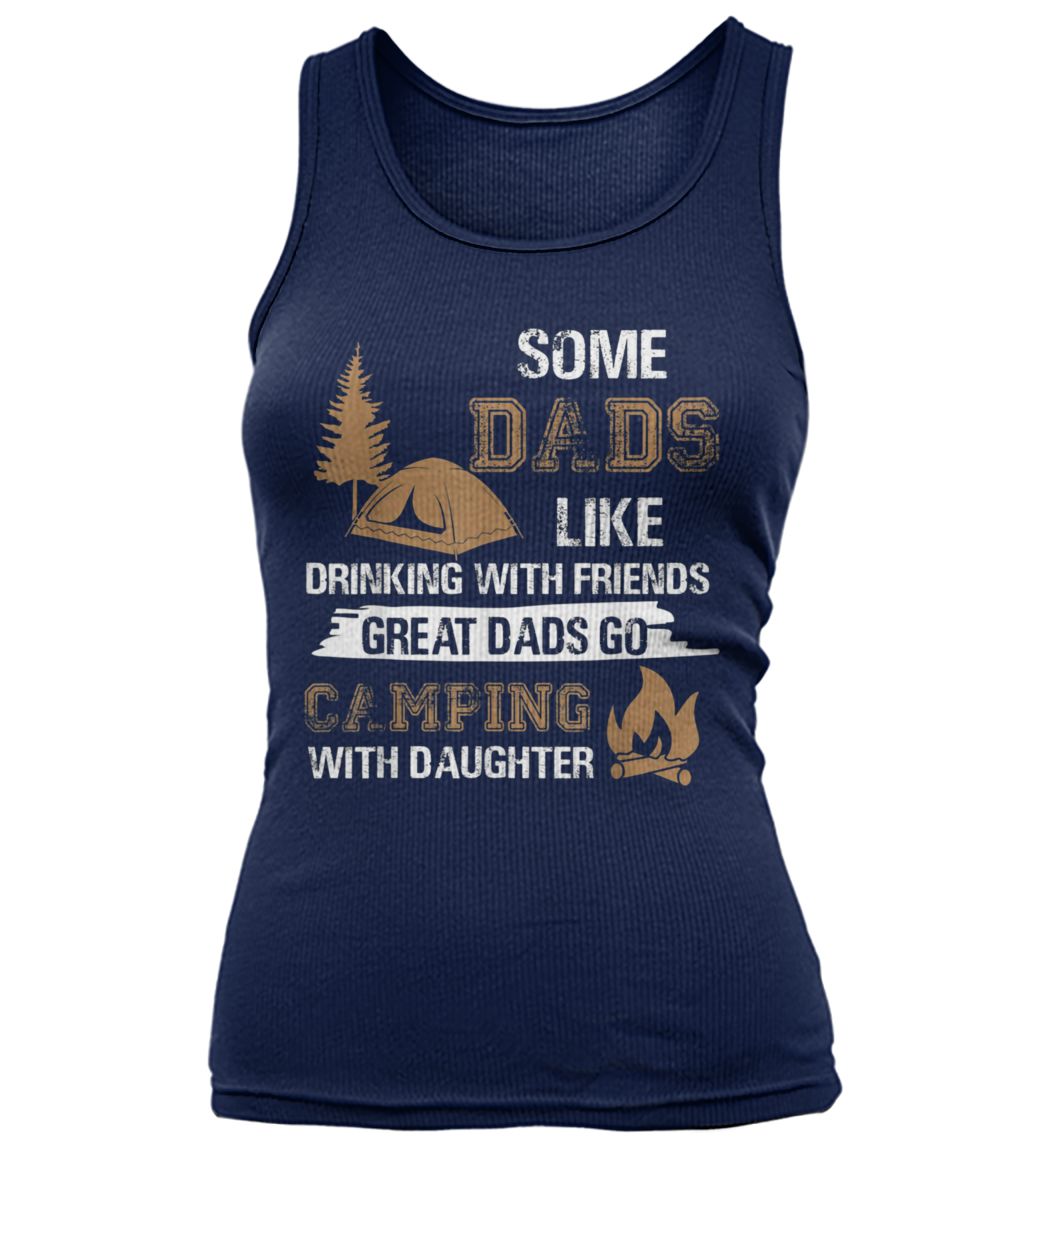 Some dads like drinking with friends great dads go camping with daughter women's tank top